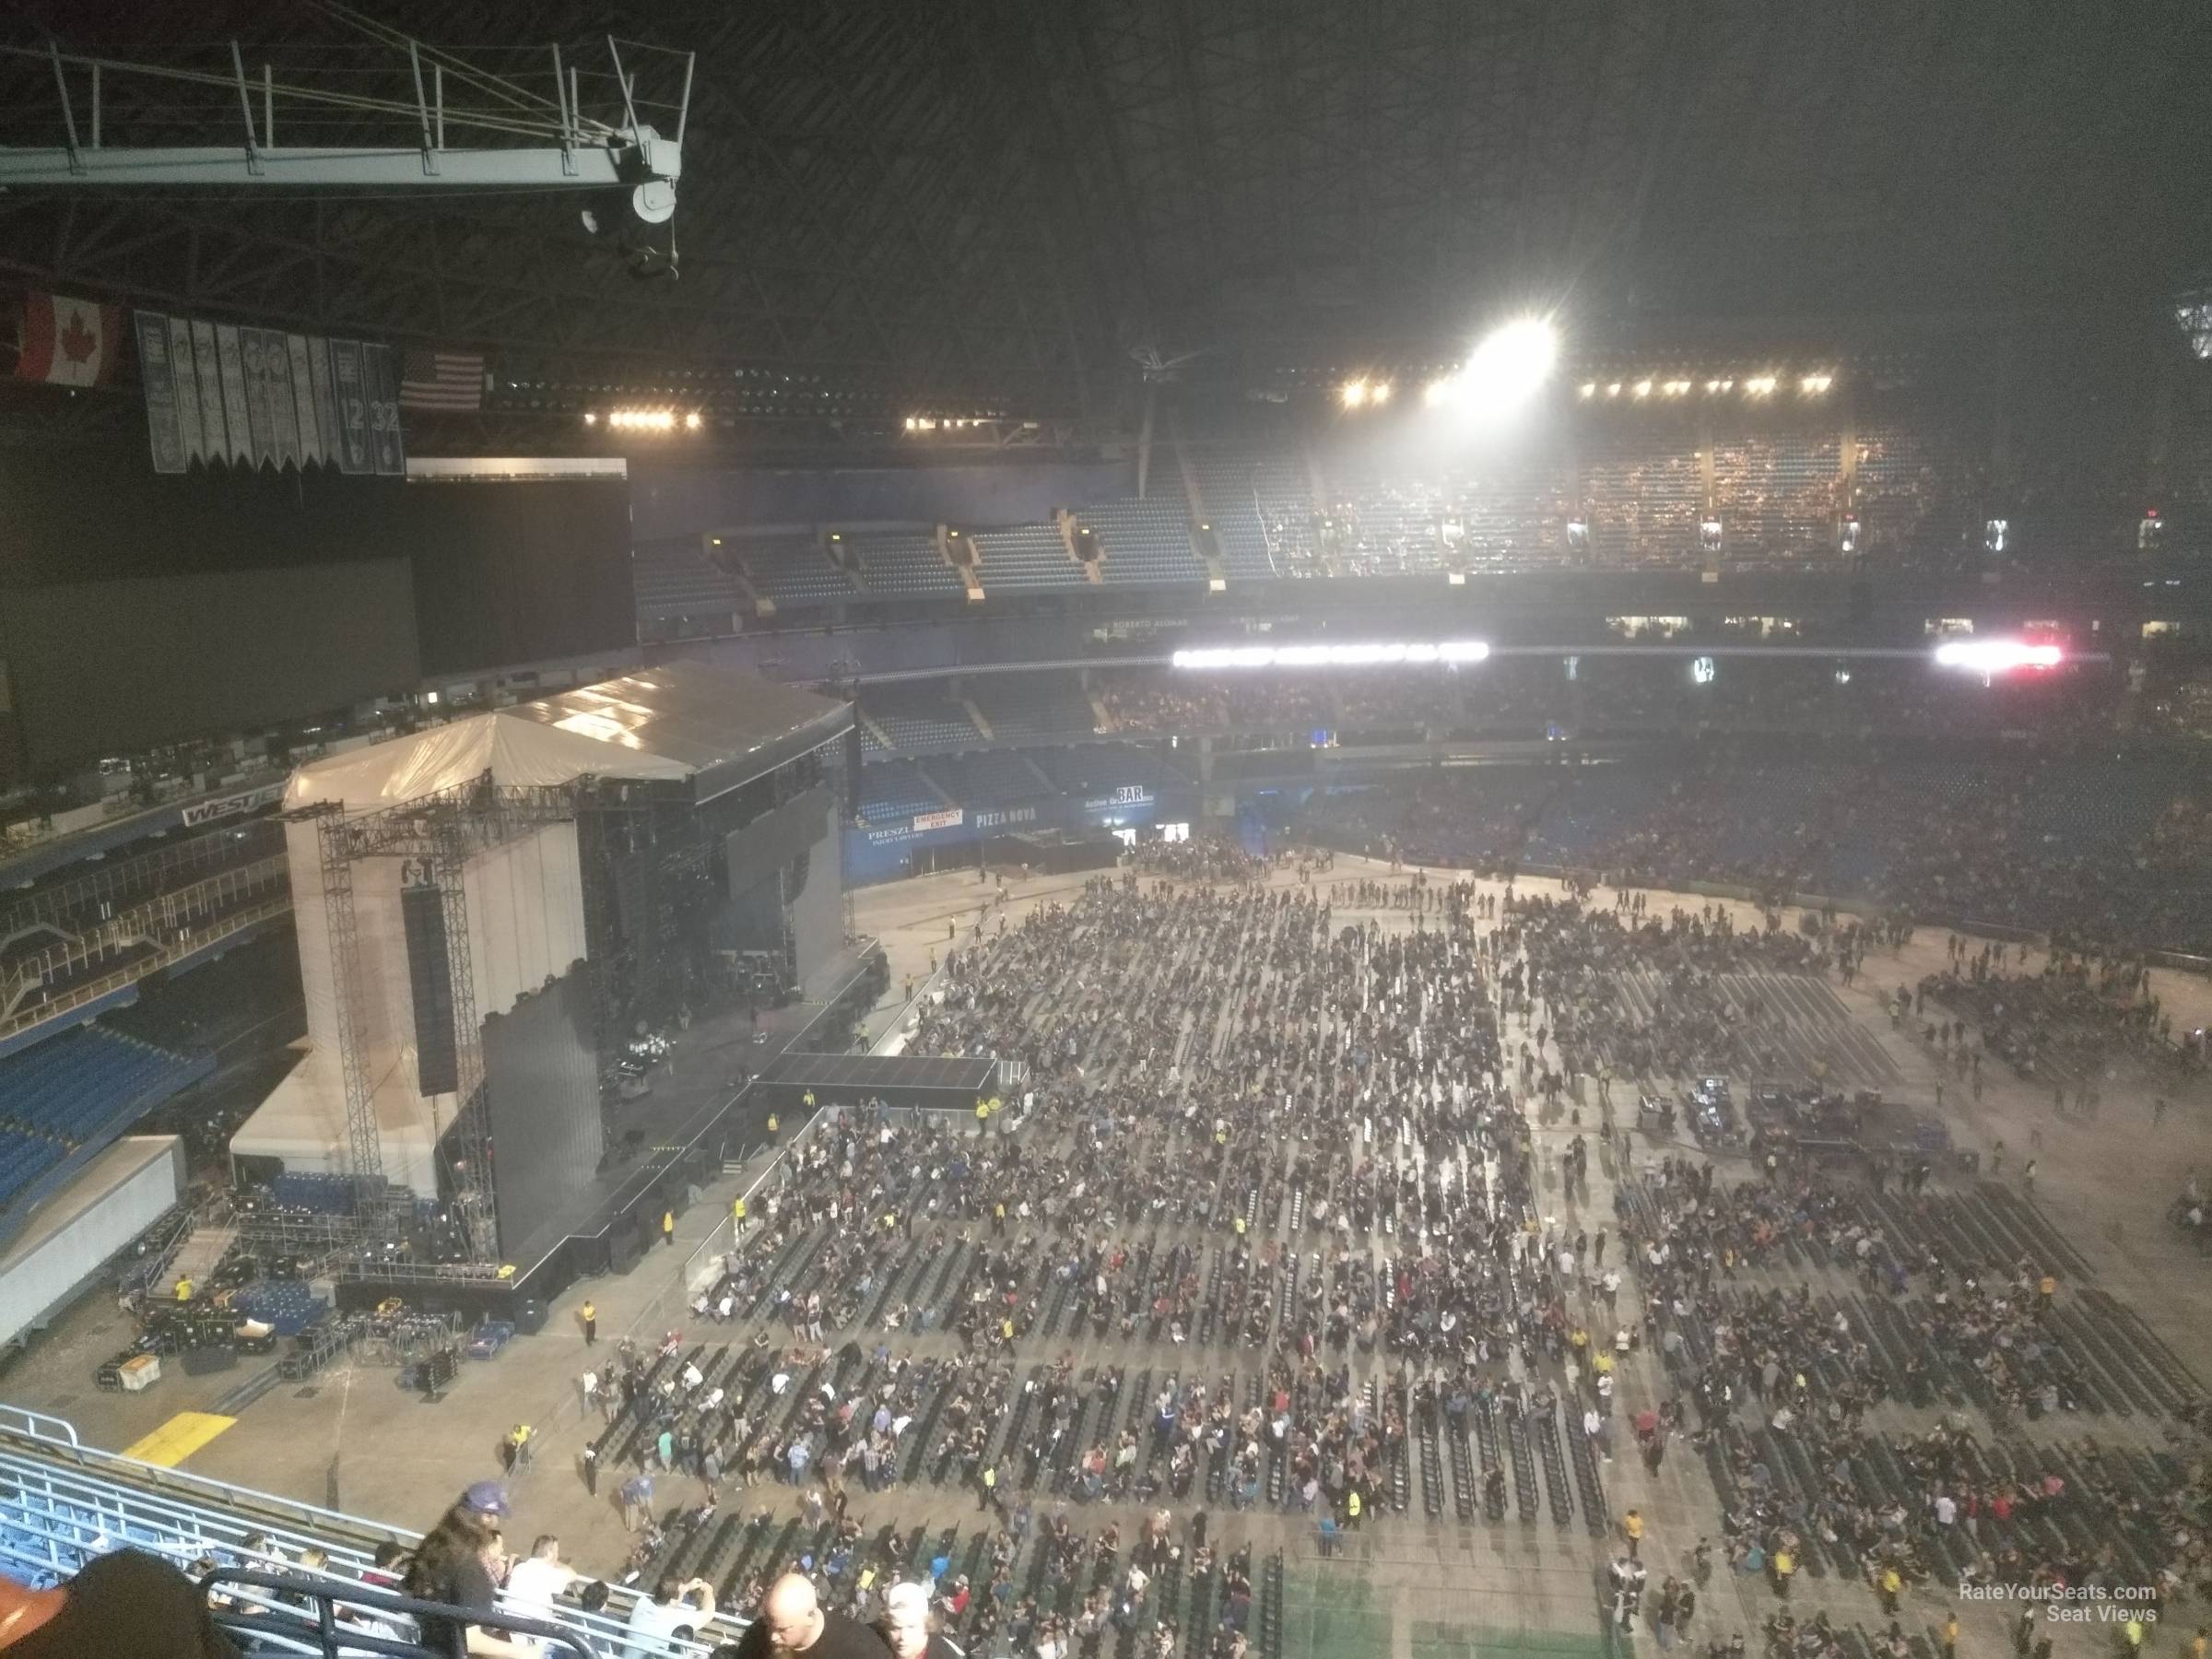 section 538, row 15 seat view  for concert - rogers centre